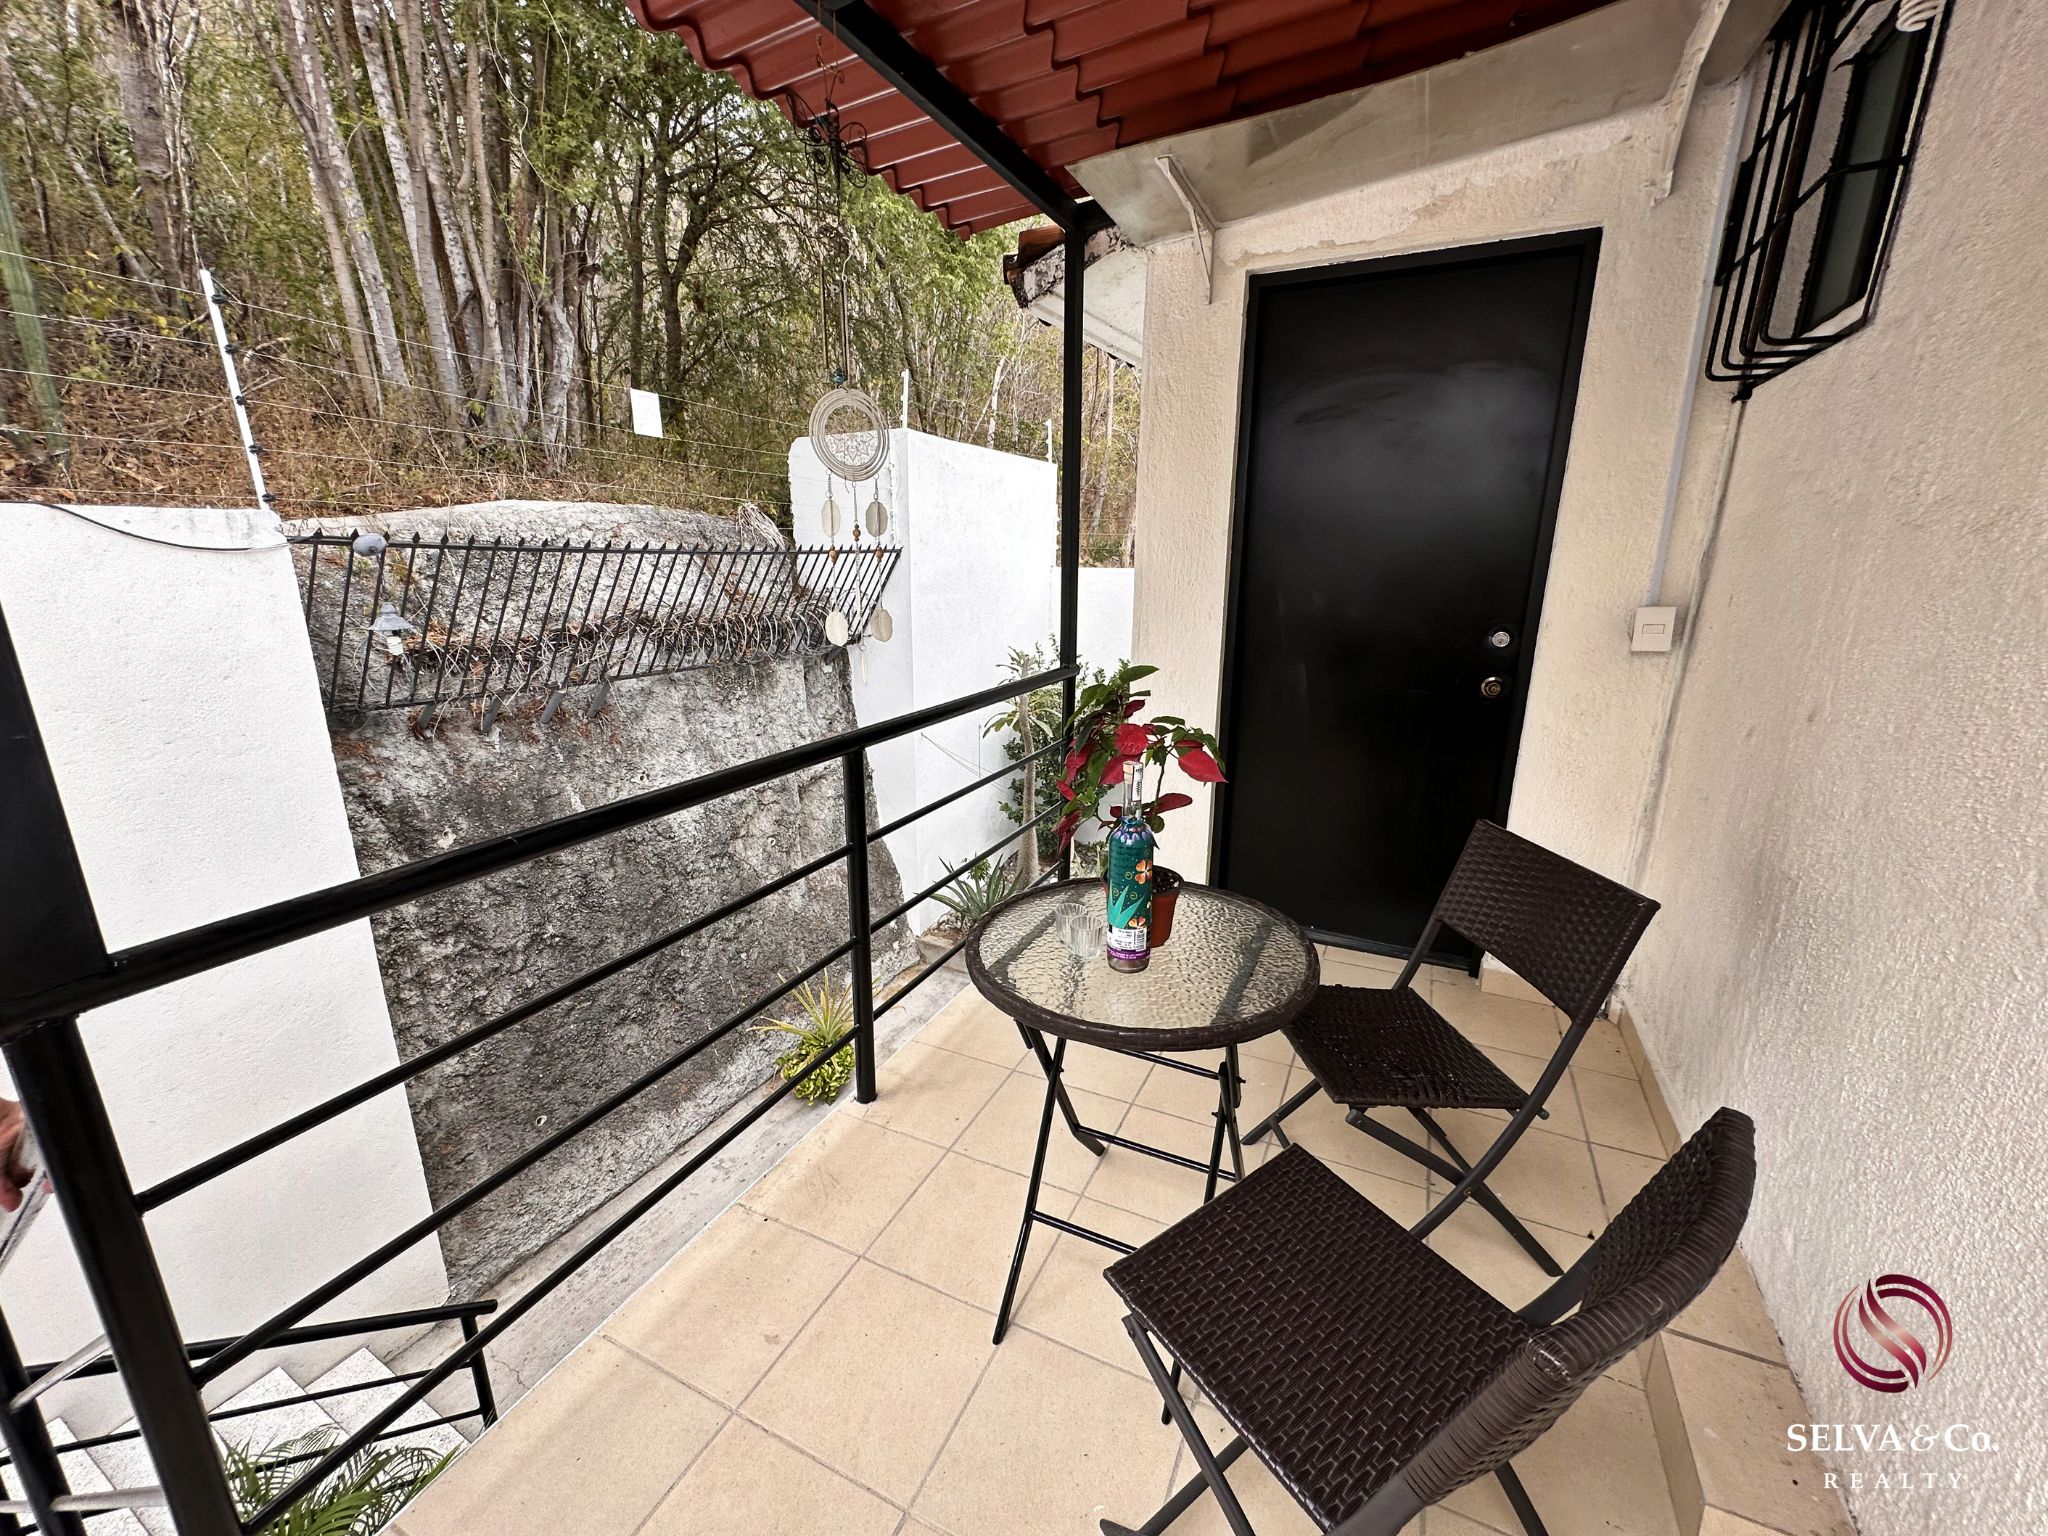 House with 4 bedrooms, jacuzzi, lock off, for sale in La Crucecita Huatulco